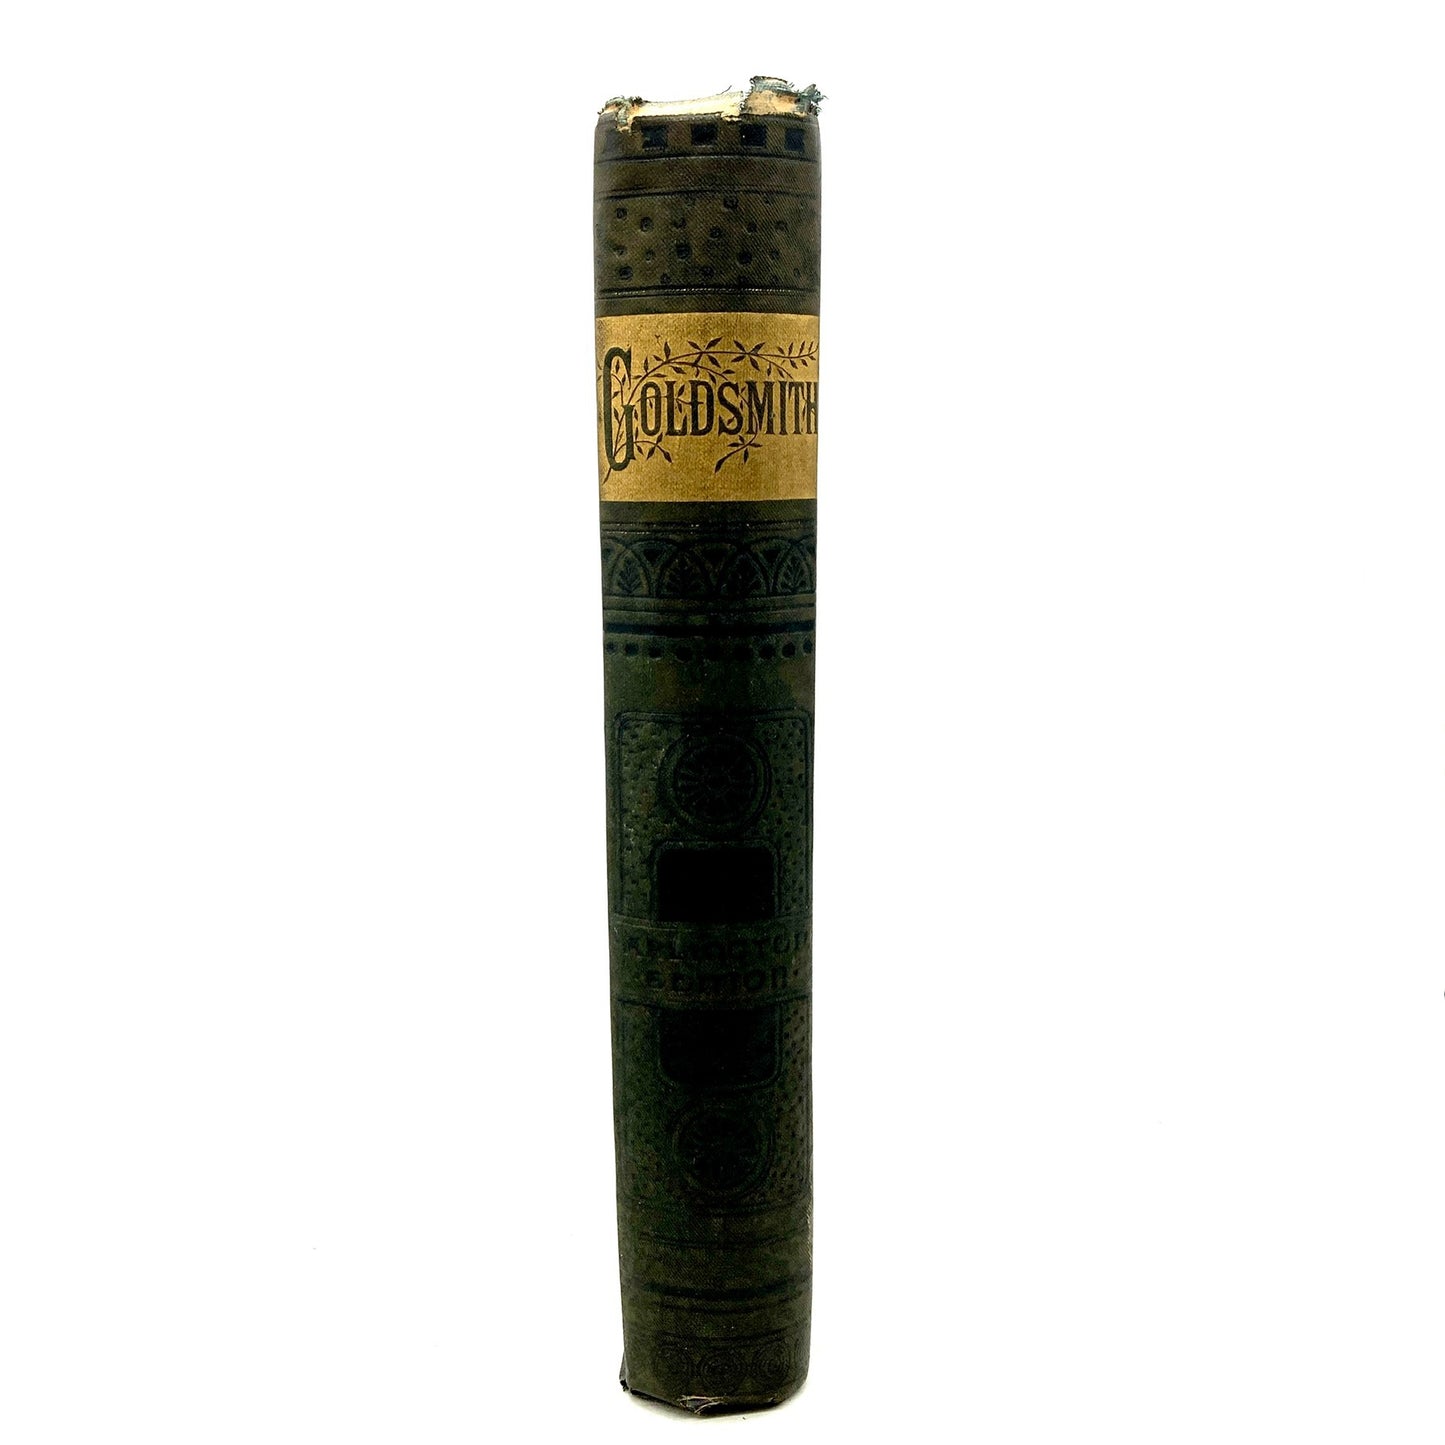 GOLDSMITH, Oliver "The Poems and Plays of Goldsmith" [Hurst & Co, n.d./c1890s]